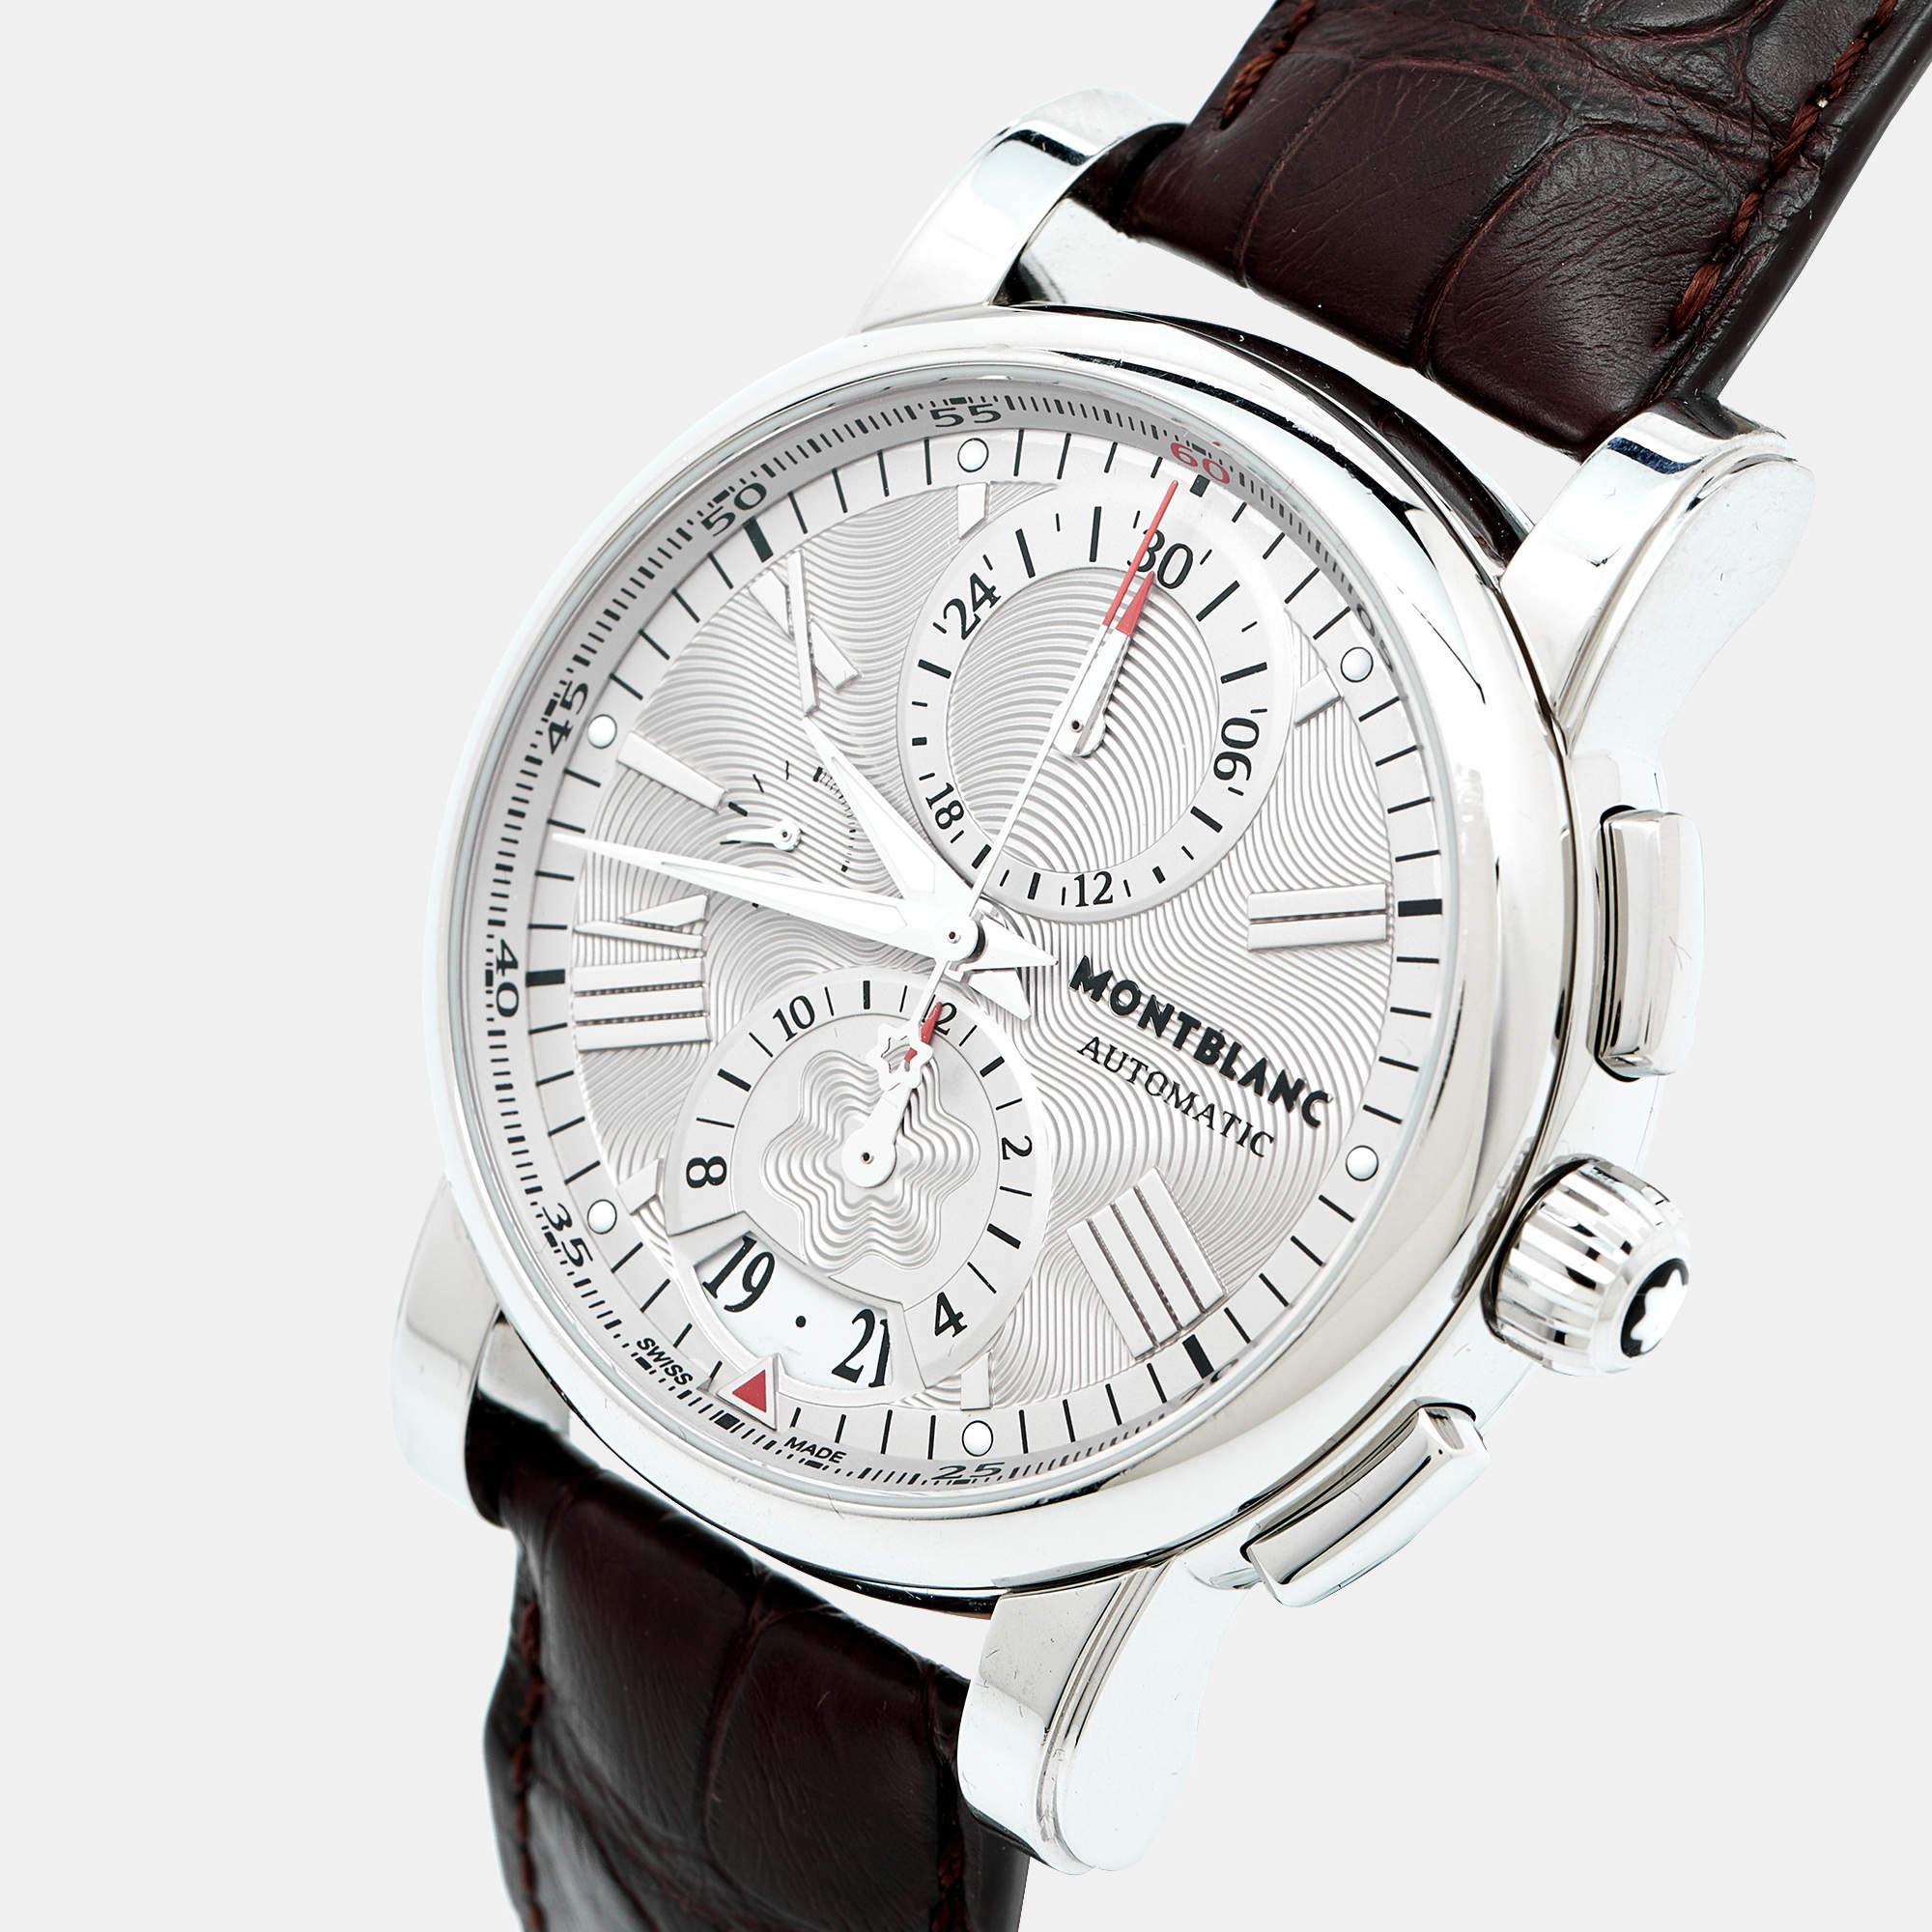 This Star 7104 Automatic men's watch from Montblanc, crafted from stainless steel, exhibits an appeal that's classic. The watch has a silver guilloche dial with distinct markers and three subdials, a smooth bezel, and an exhibition caseback. It is